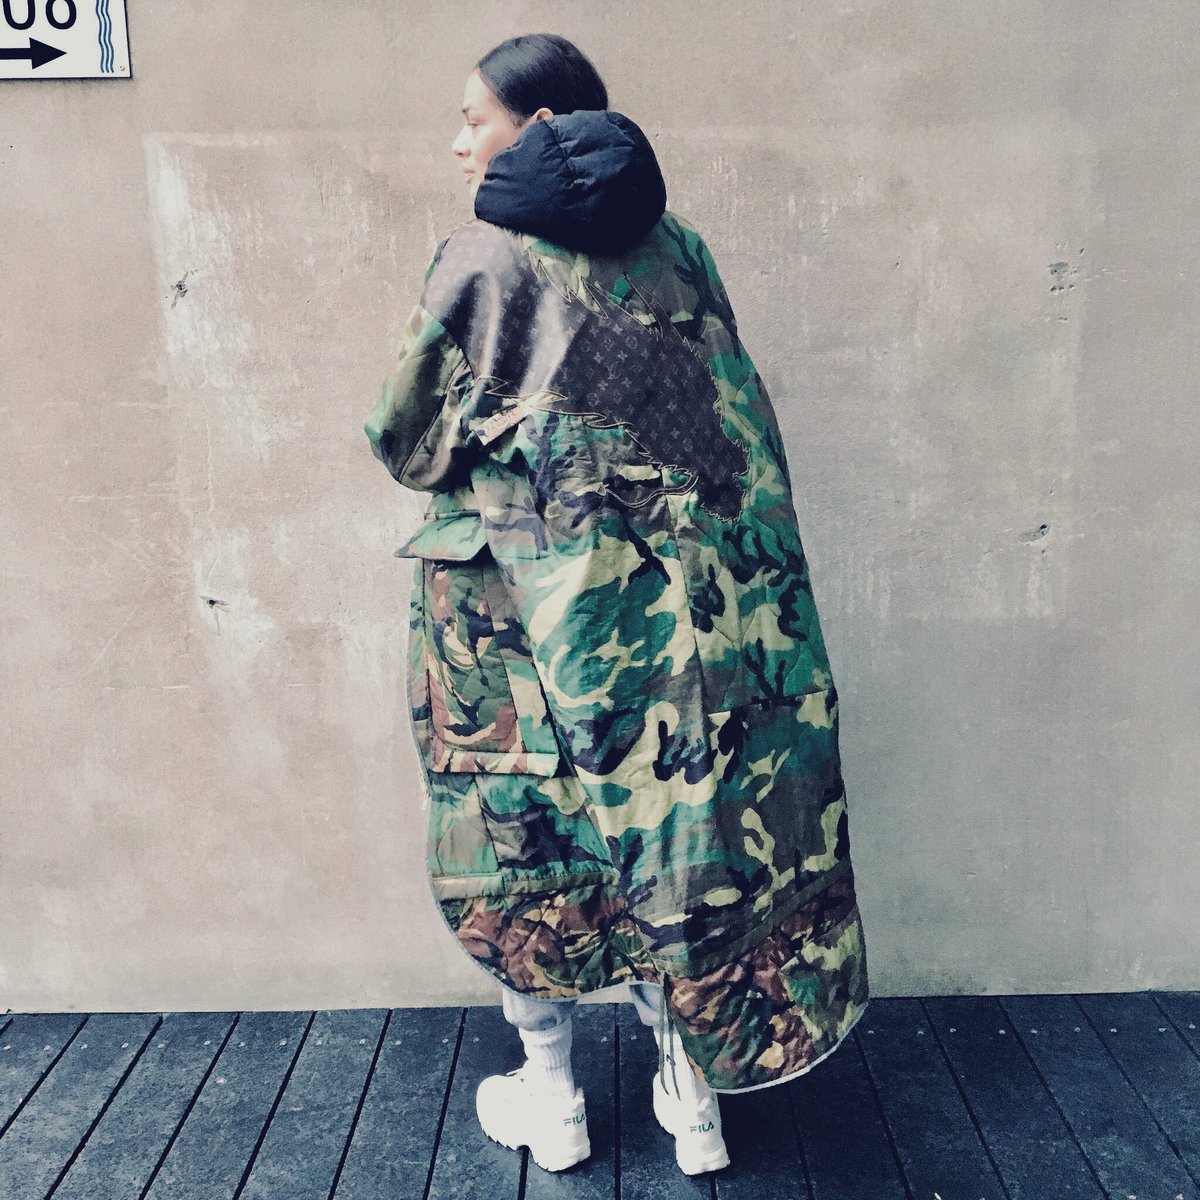 In Love with a #camocoat by #reserveboys #amsterdam ✔️